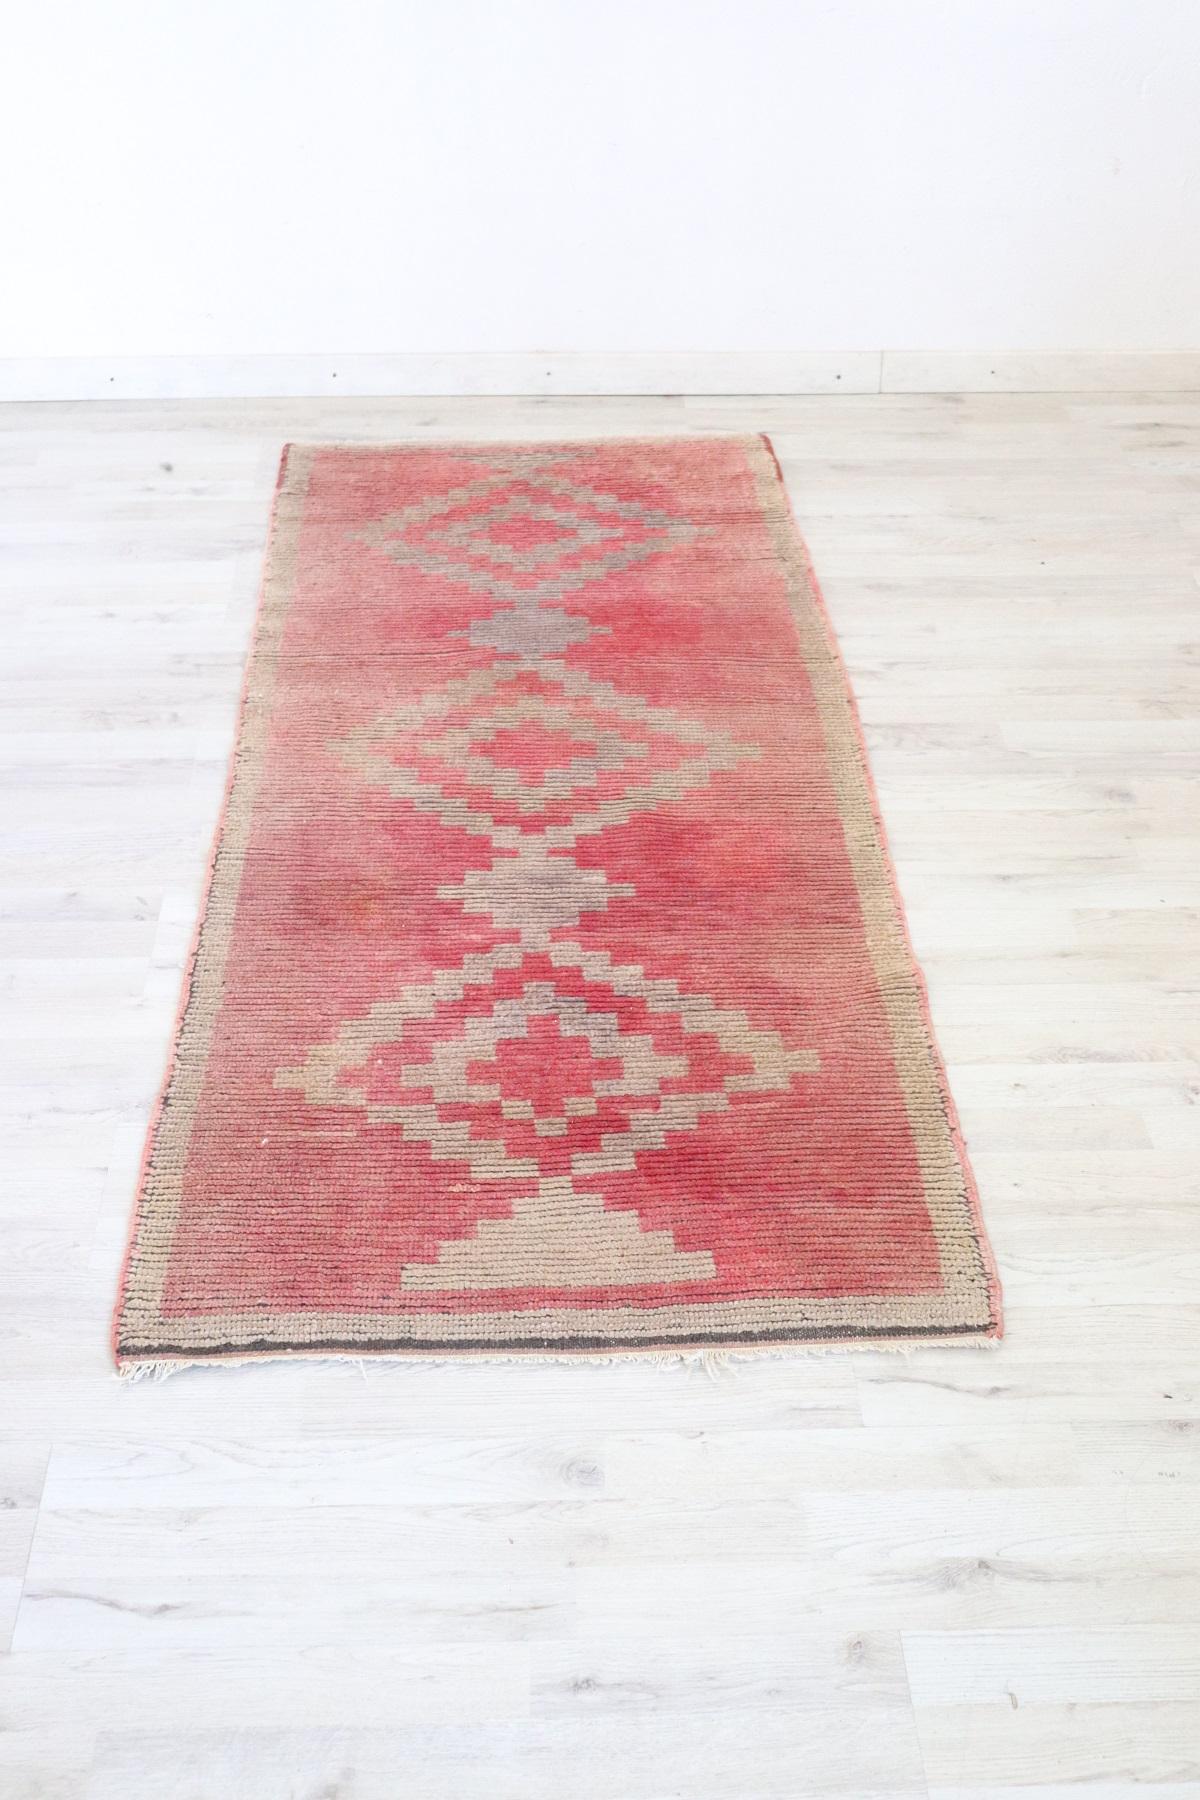 Nice early 20th century Turkish rug with a beautiful geometric decoration entirely hand knotted with wool.